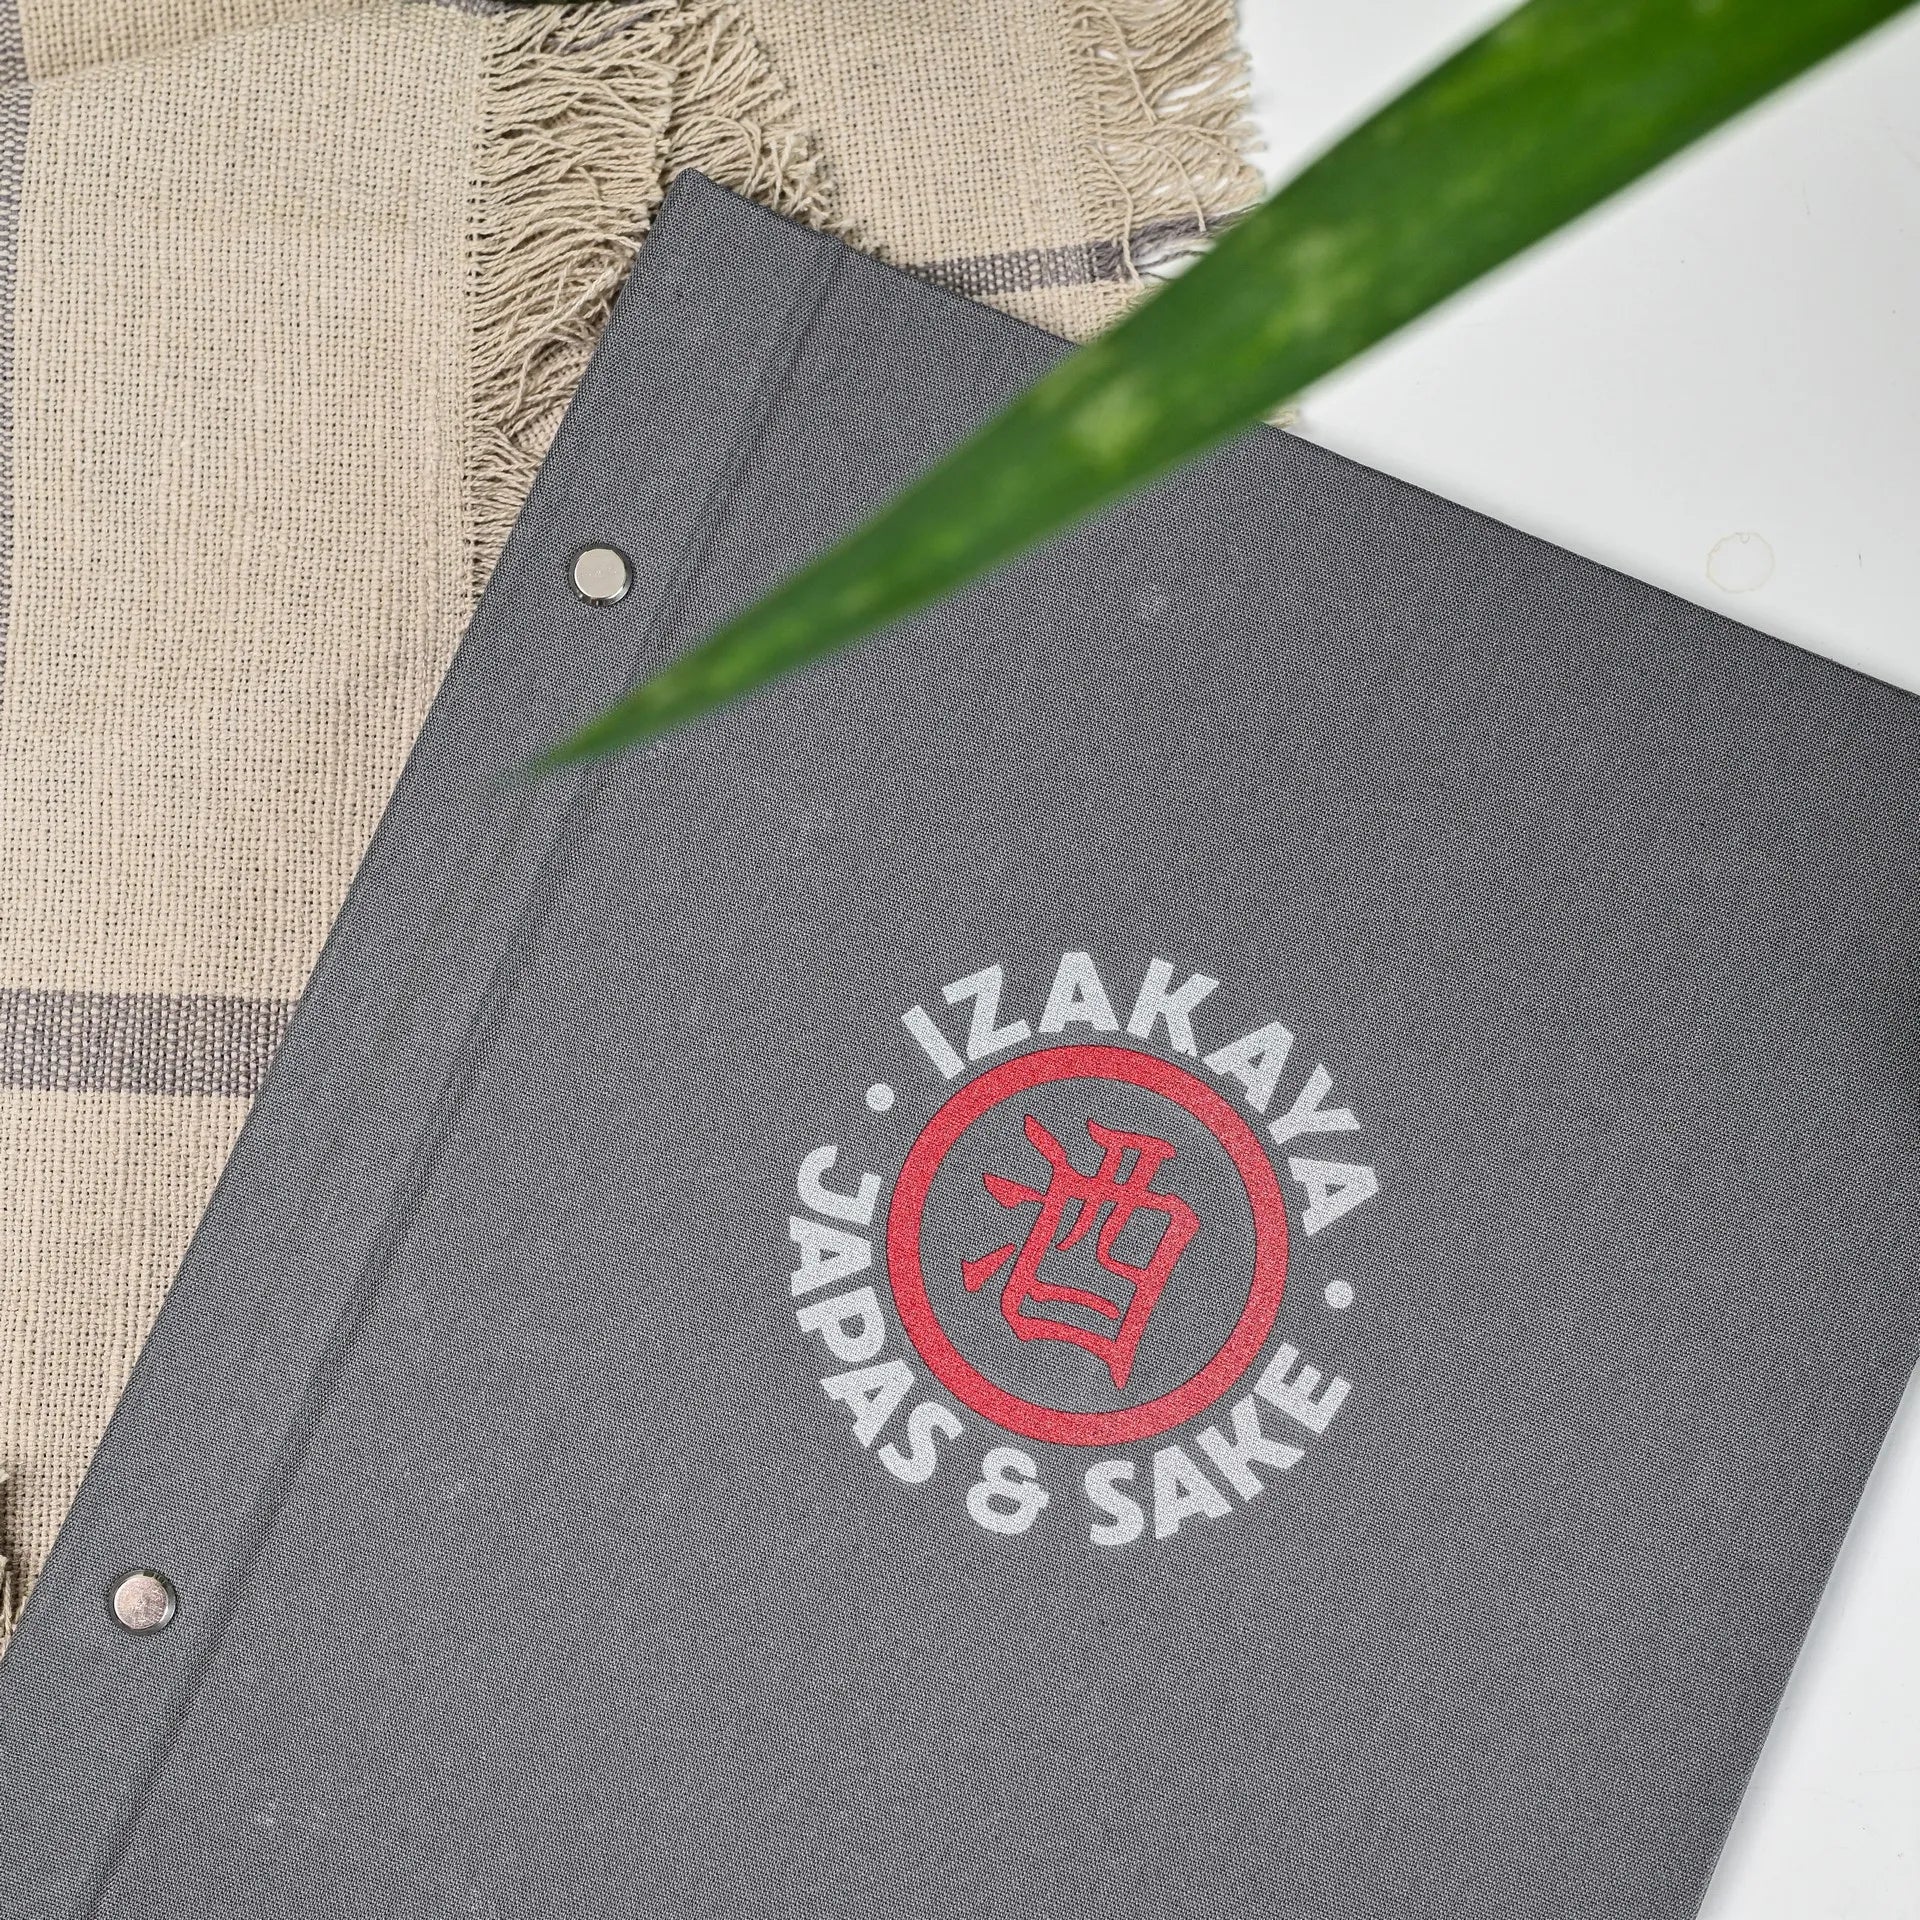 Elegant drink menu cover with personalized logo, perfect for restaurants. Easily changeable sheets allow for quick updates to your menu offerings.